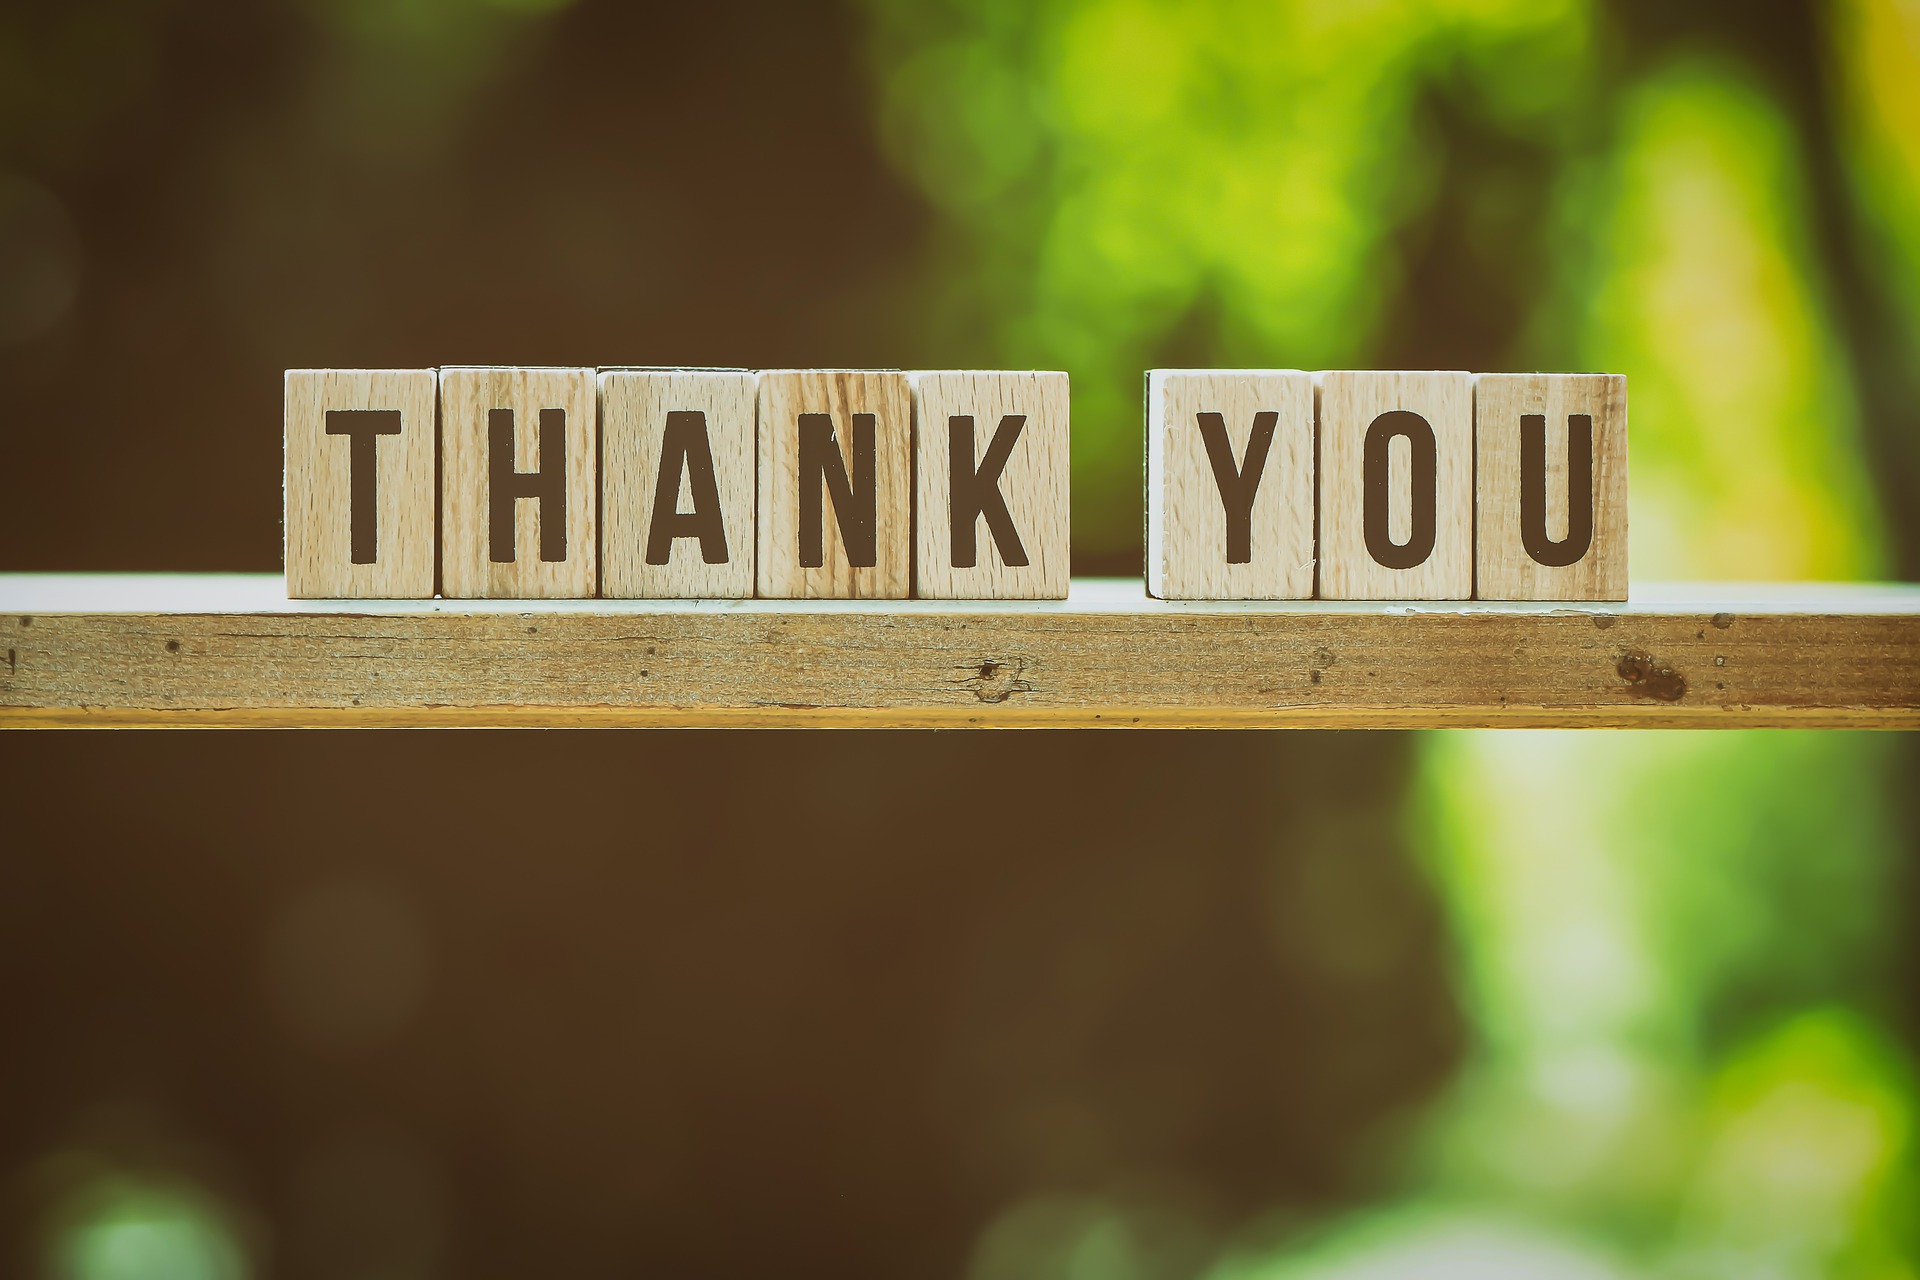 The Art of Thank You in a Digital Age.